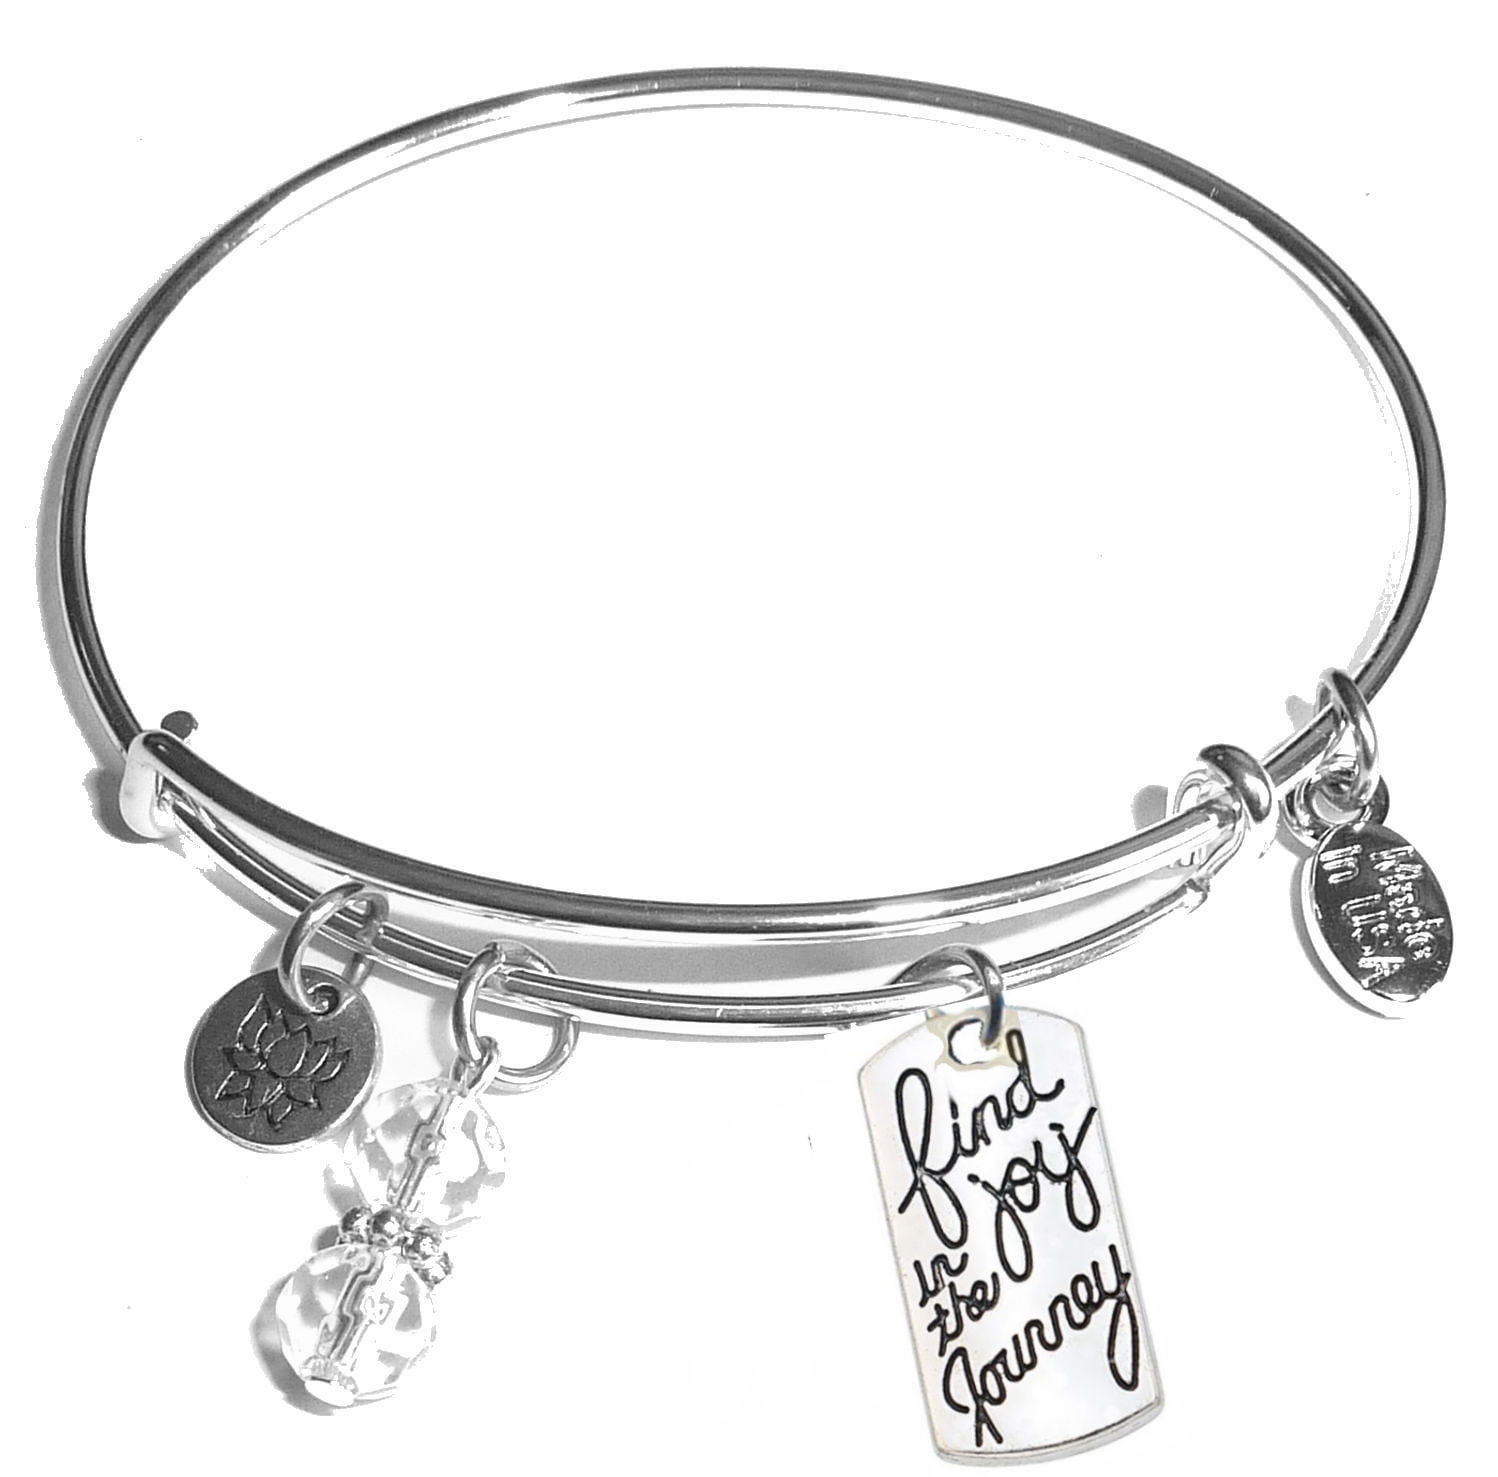 Buy M MOOHAM Heart Charm Bracelets for Women  Initial Charm Engraved  Letter A Initial Bracelet Stainless Steel Expandable Charms Bangle Bracelets  Birthday Jewelry Gifts for Women Teen Girls Online at Low